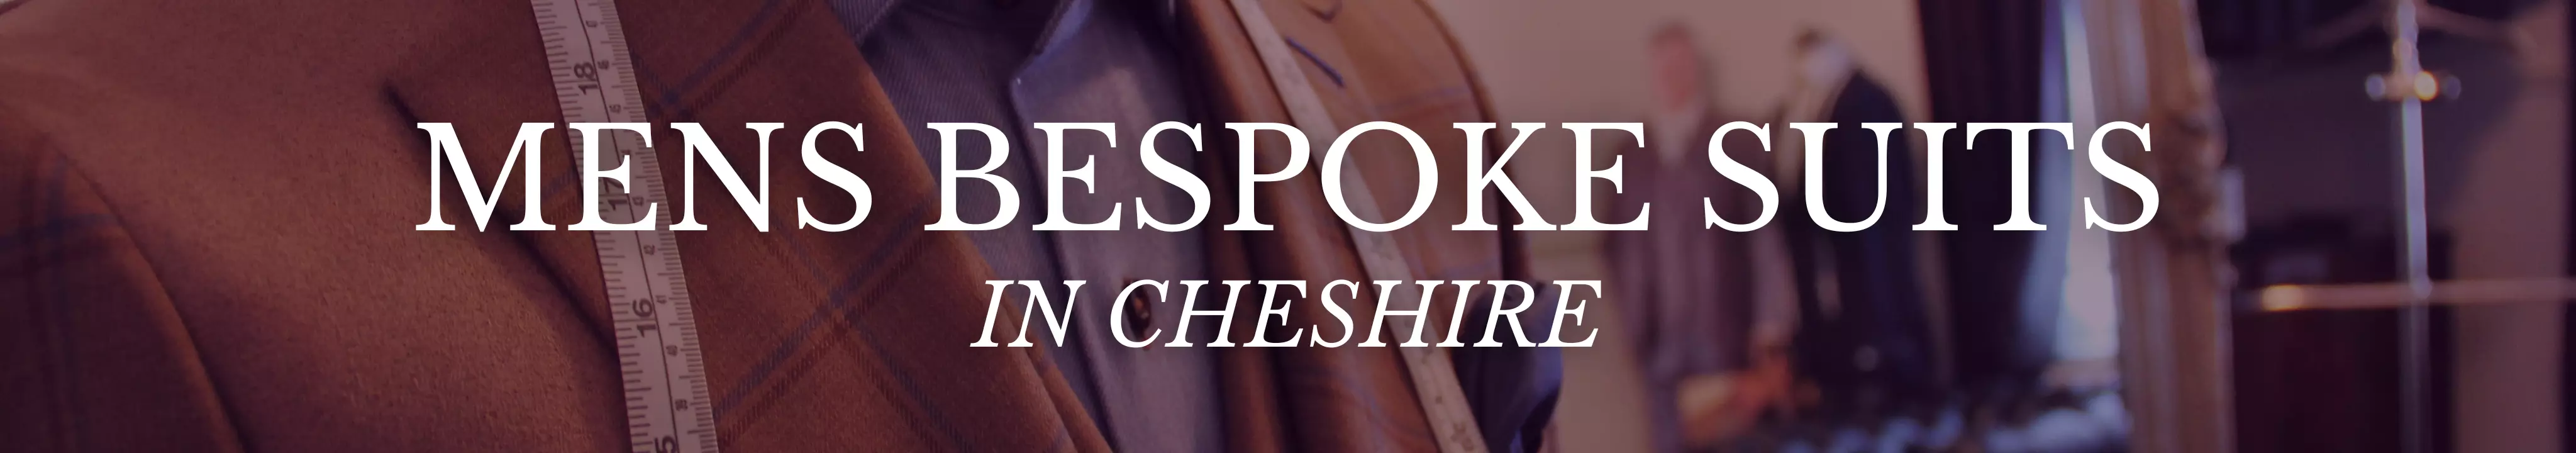 Mens bespoke suits in Cheshire